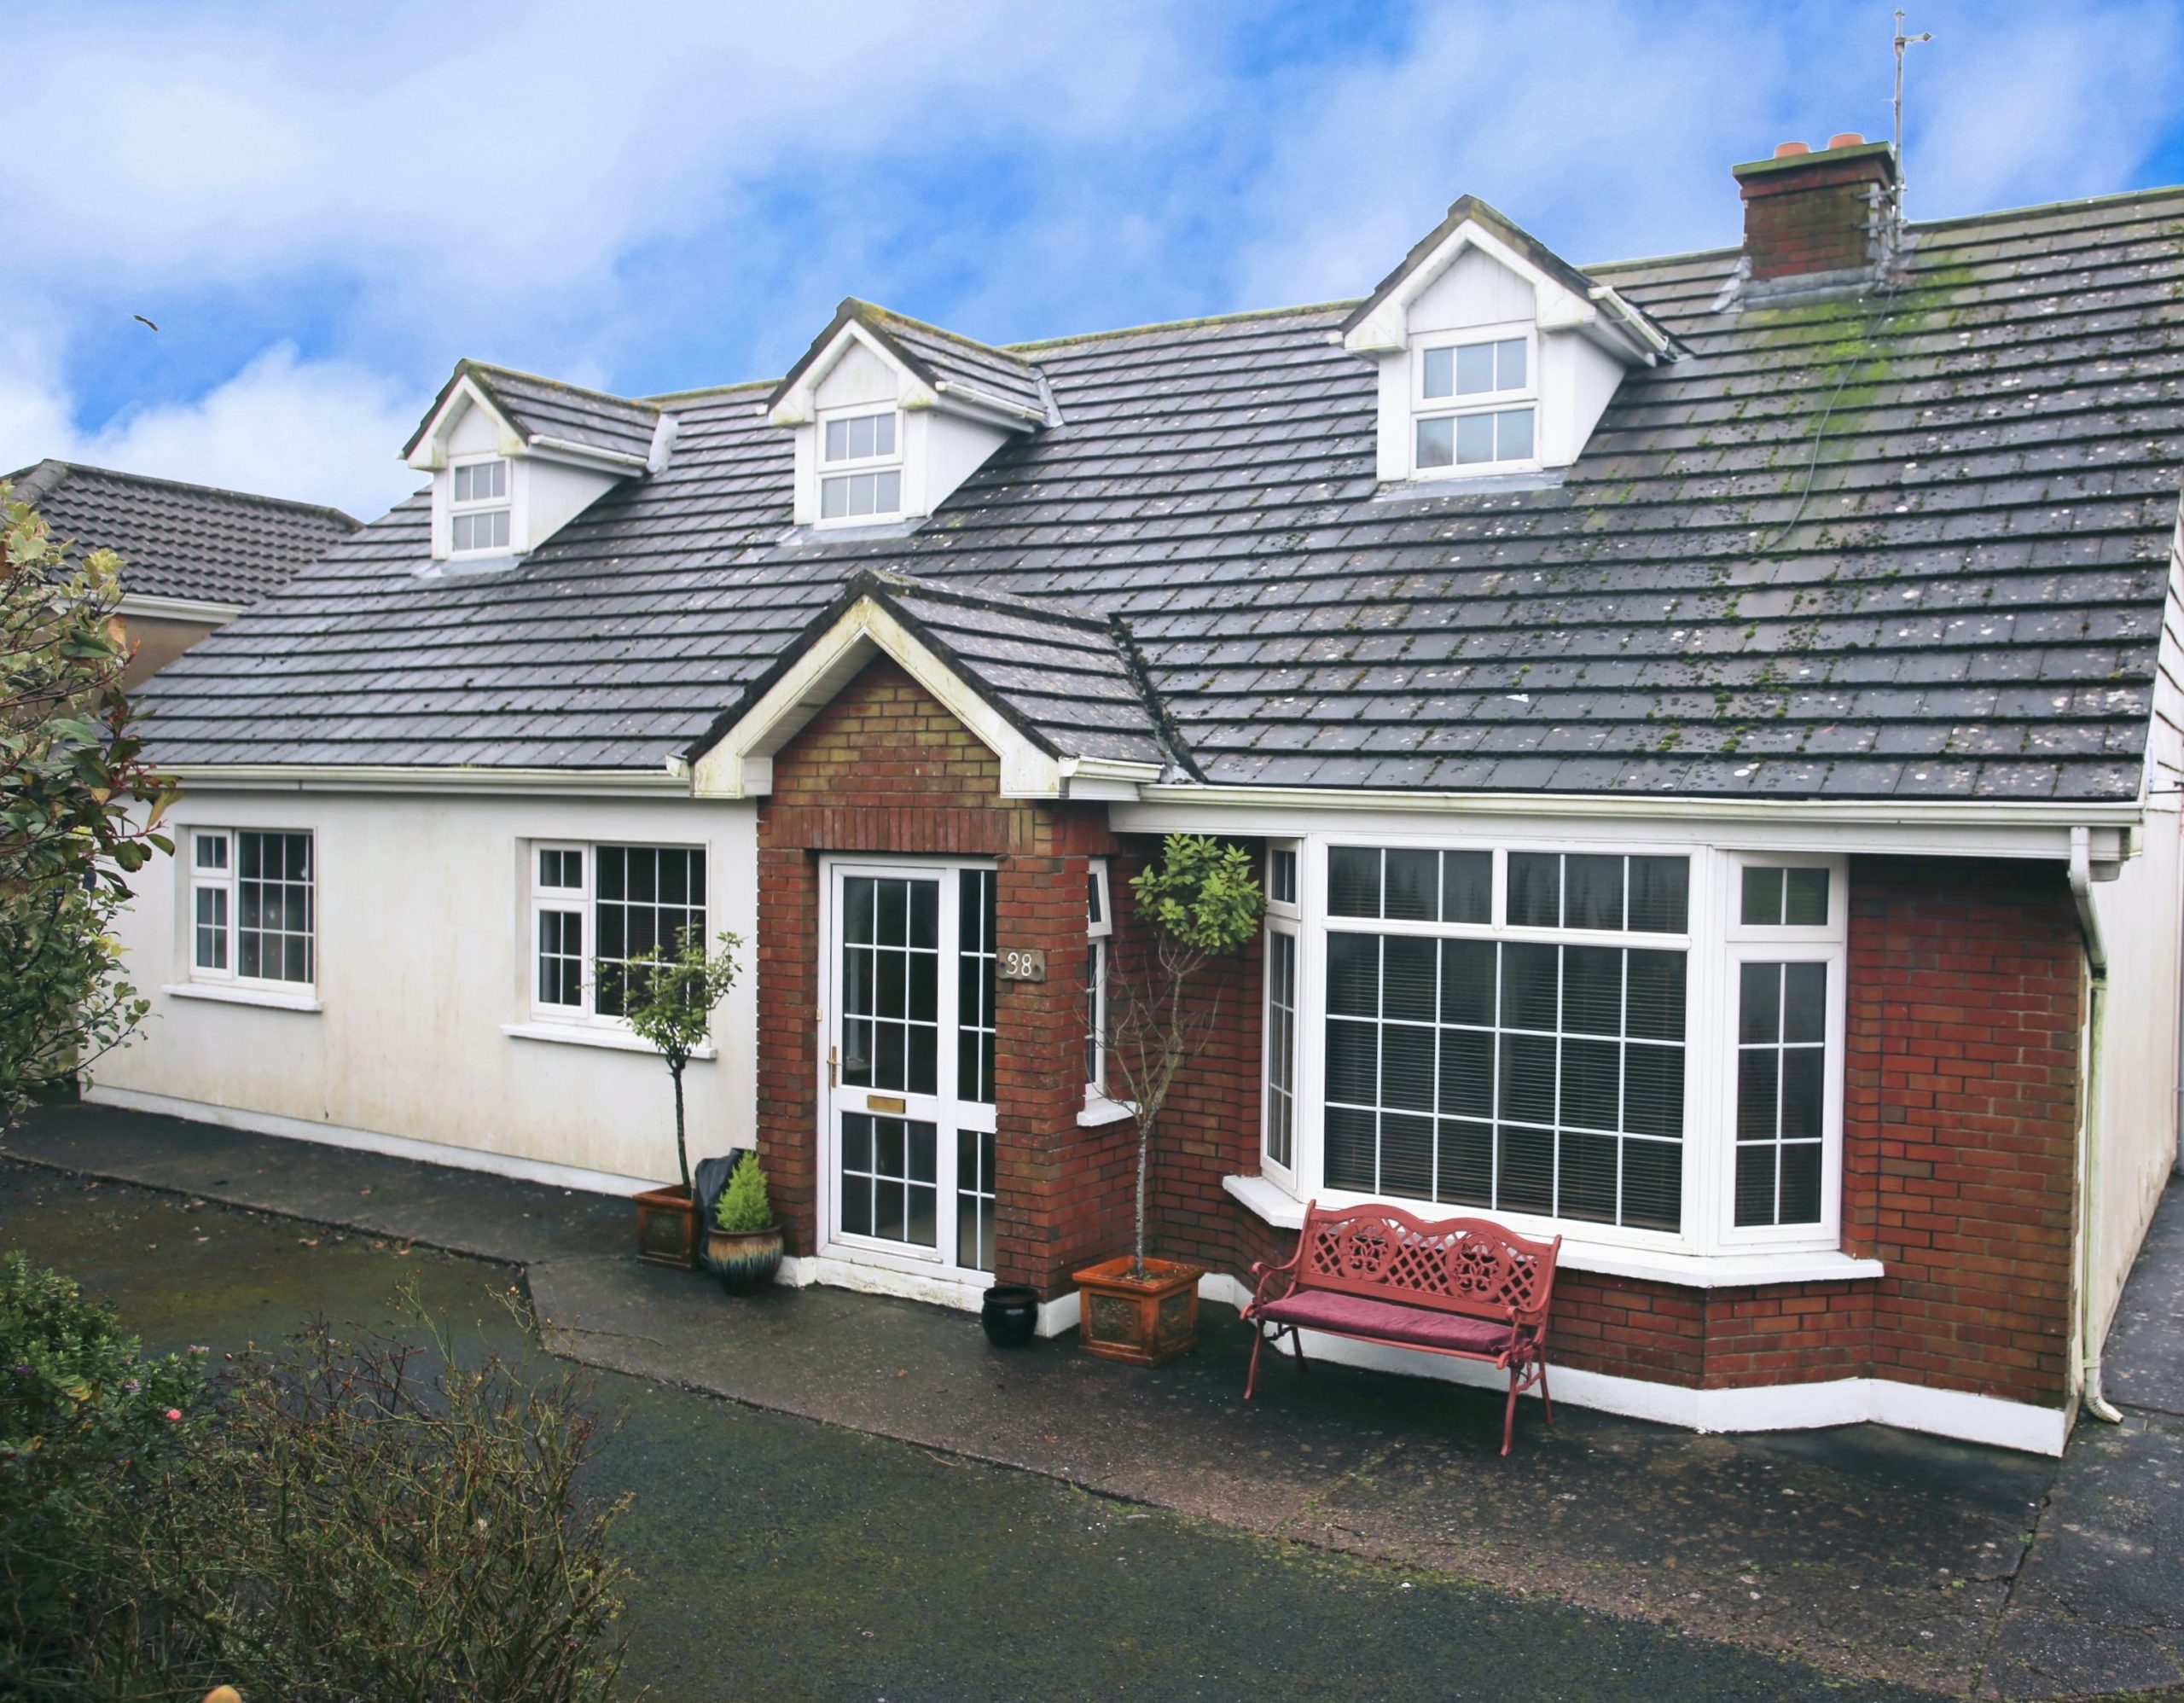 38 Knockaverry, Youghal